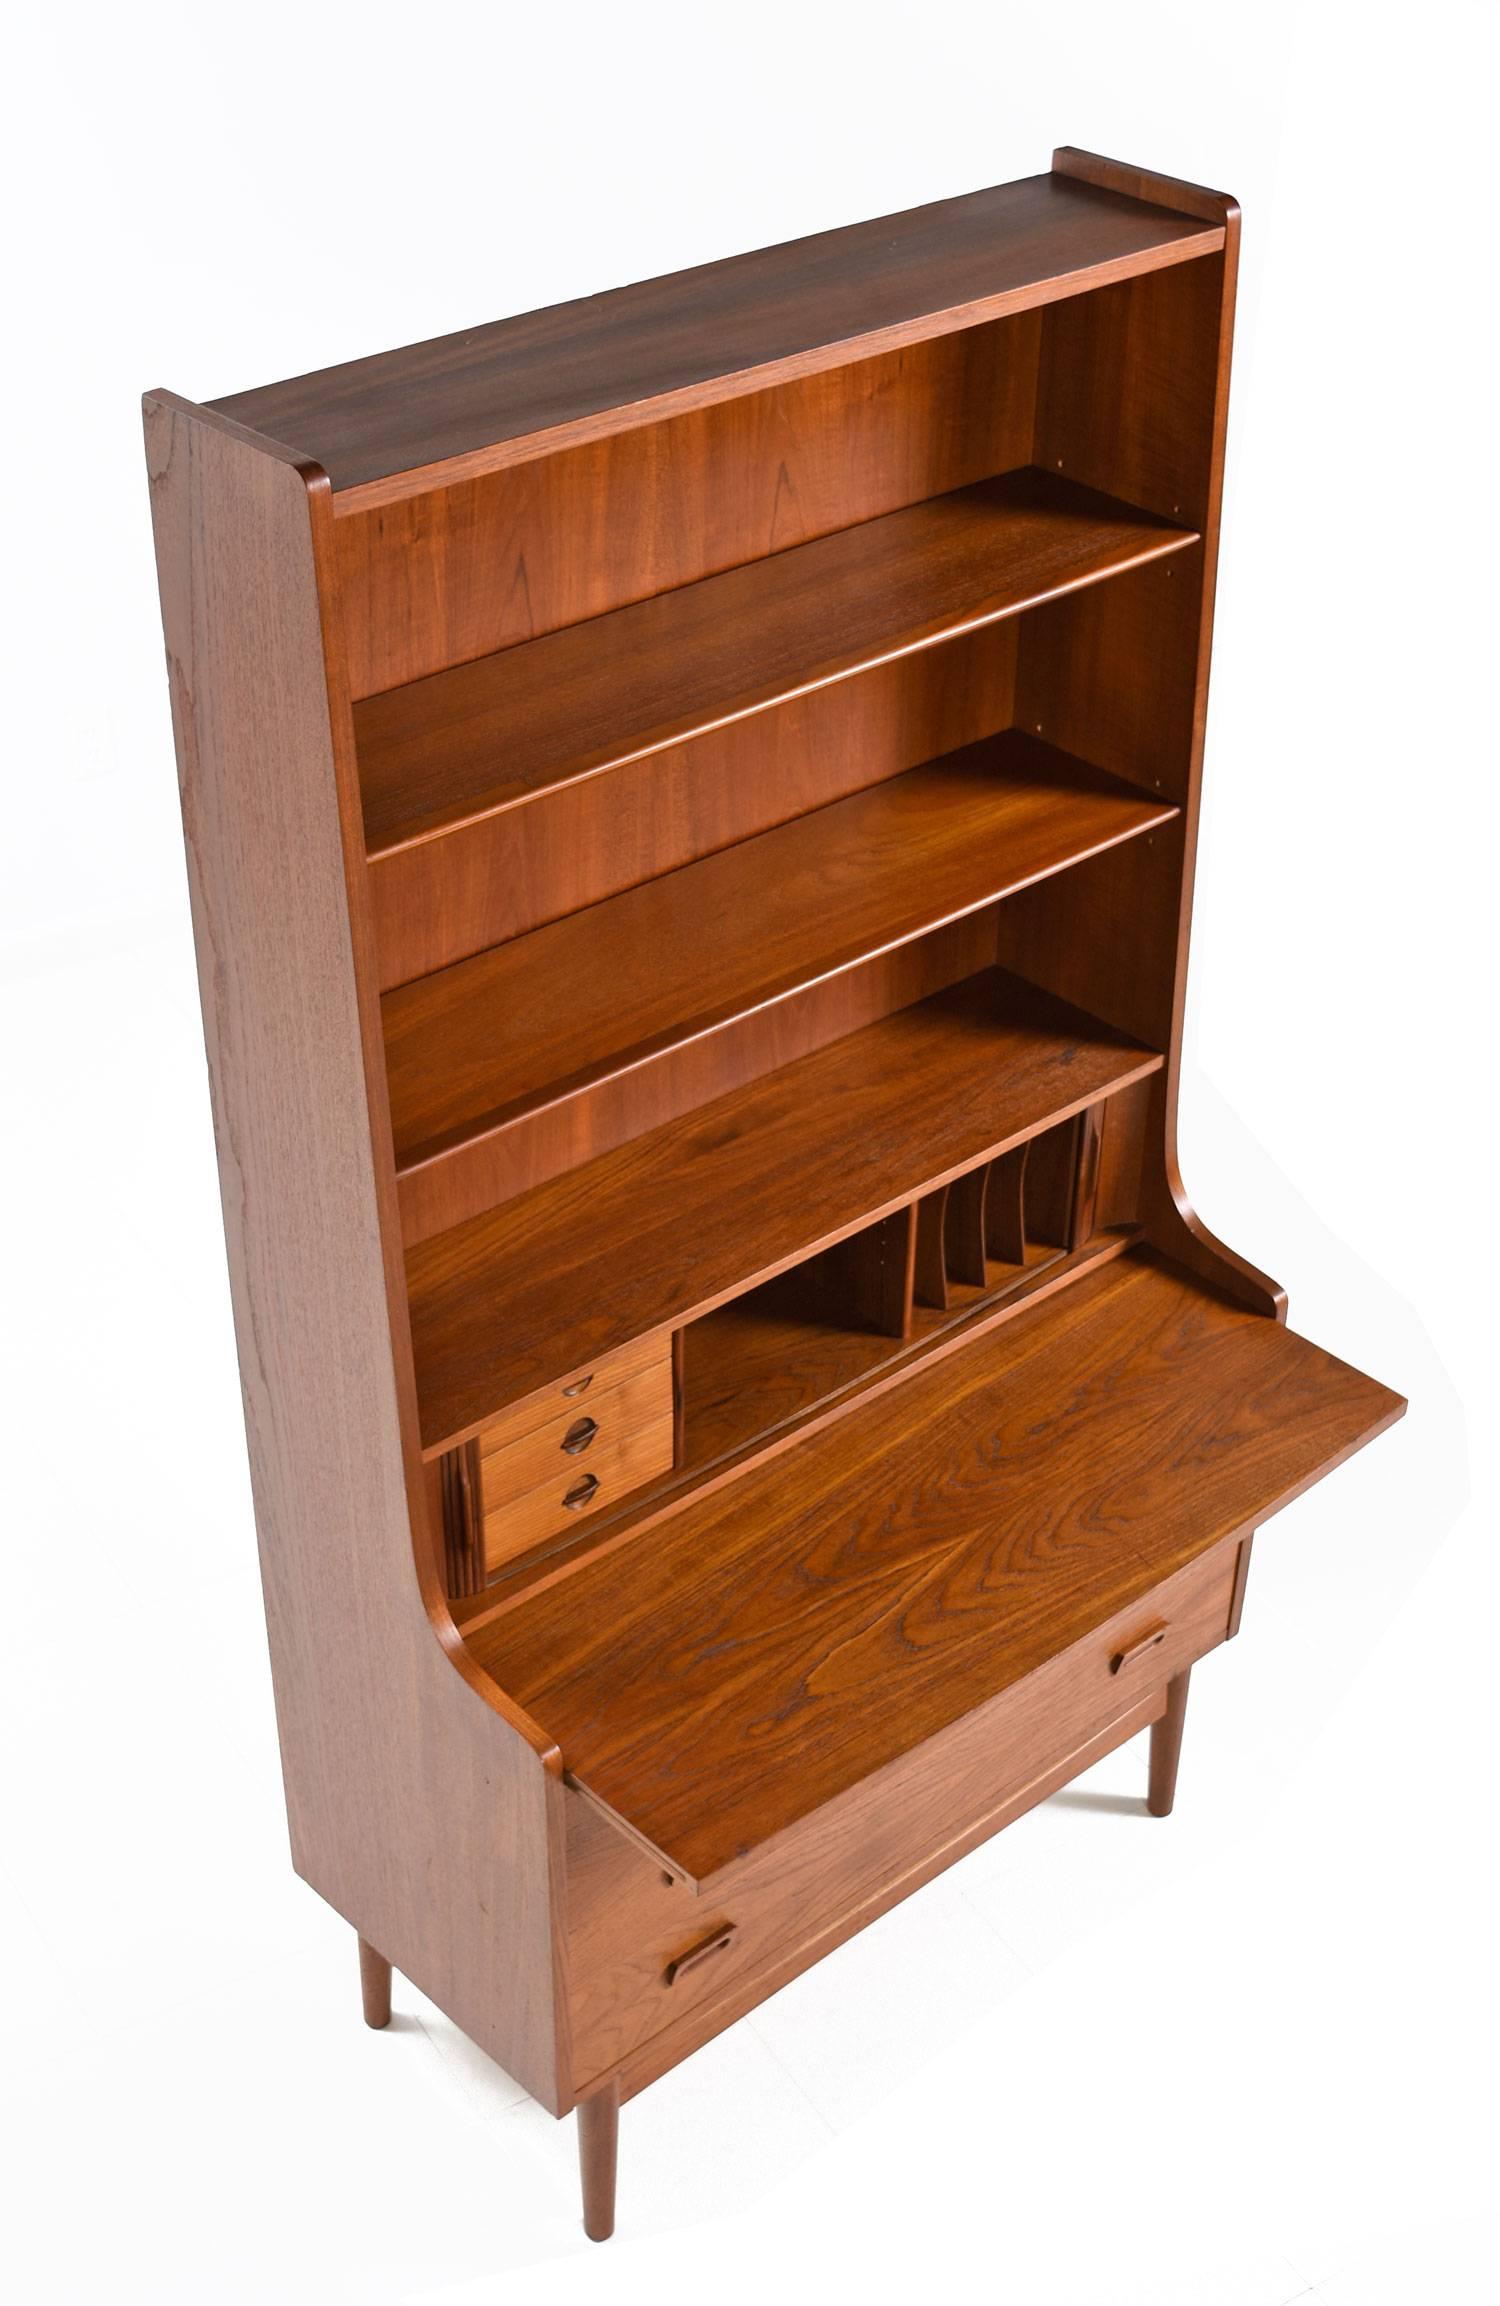 Exquisite Danish made bookcase with secretary desk. The piece packs a wallop with storage capability. Store books and collectibles on the upper bookcase, private storage with divided compartments are concealed behind the tambour doors at center.